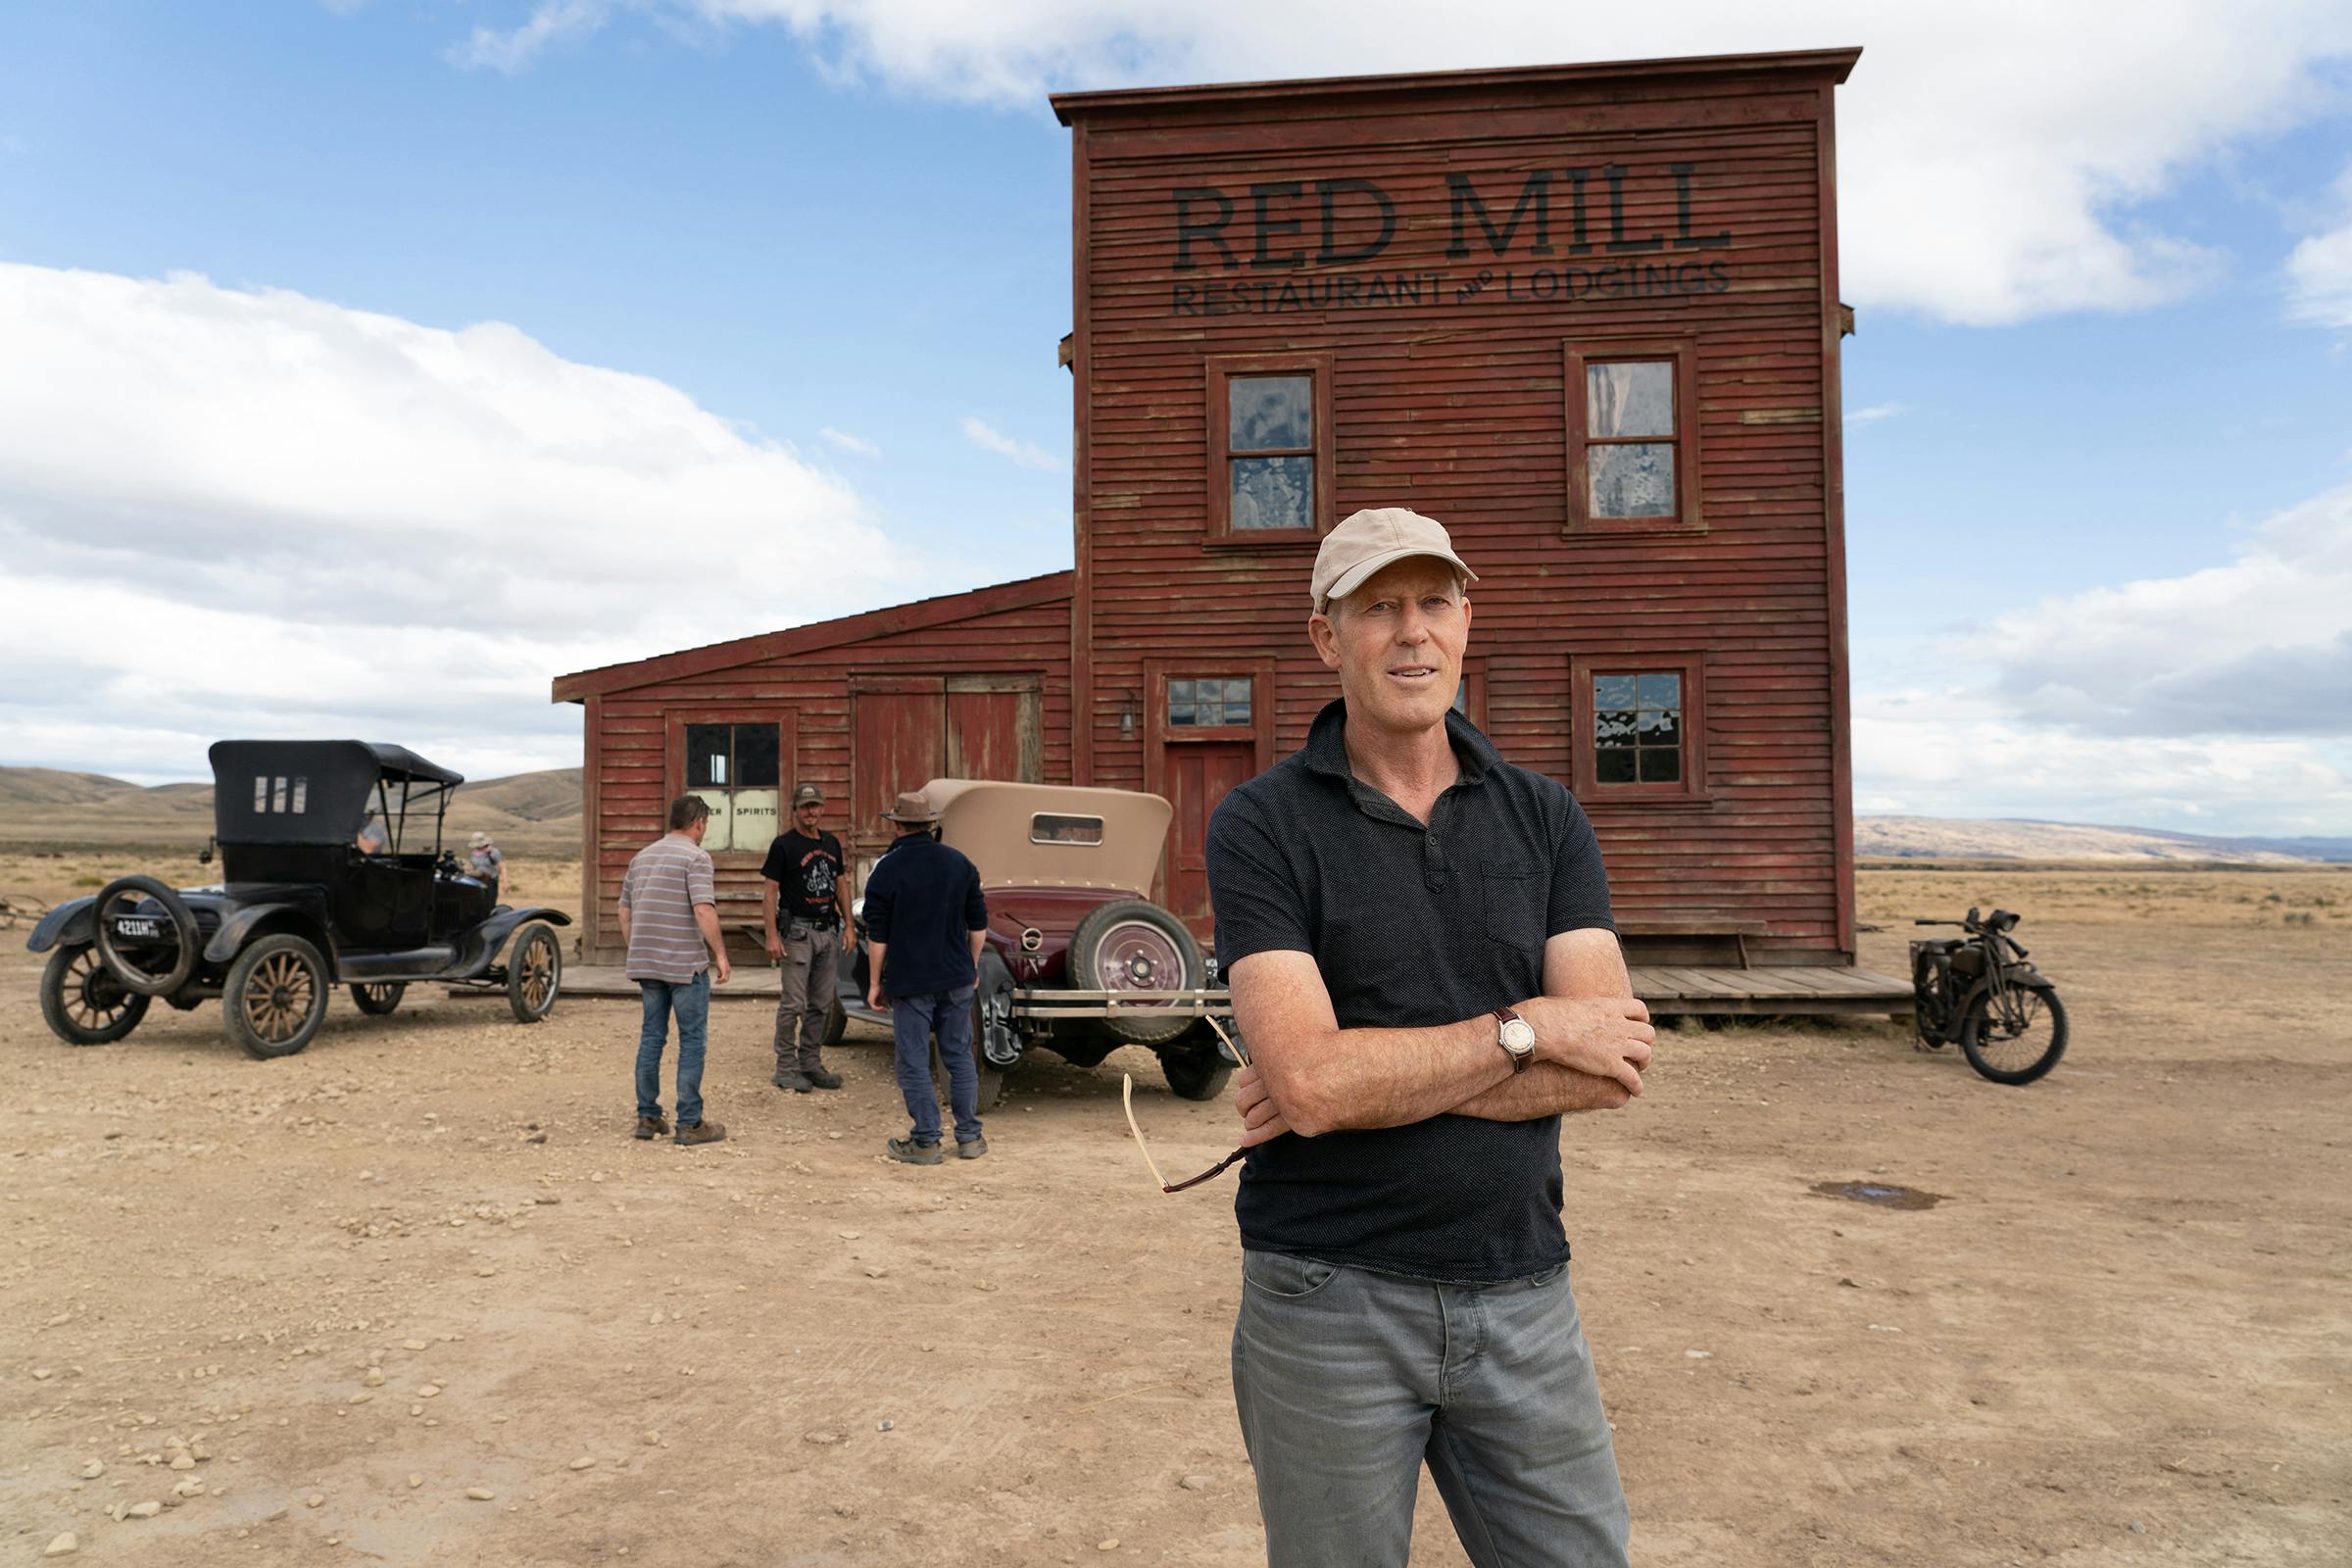 Grant Major stands outside the Red Mill set — which is on wheels — with his arms crossed. The sky is blue with puffy white clouds, the ground is sandy and dusty. Major wears a black polo shirt and grey pants. People and buggies dot the background.